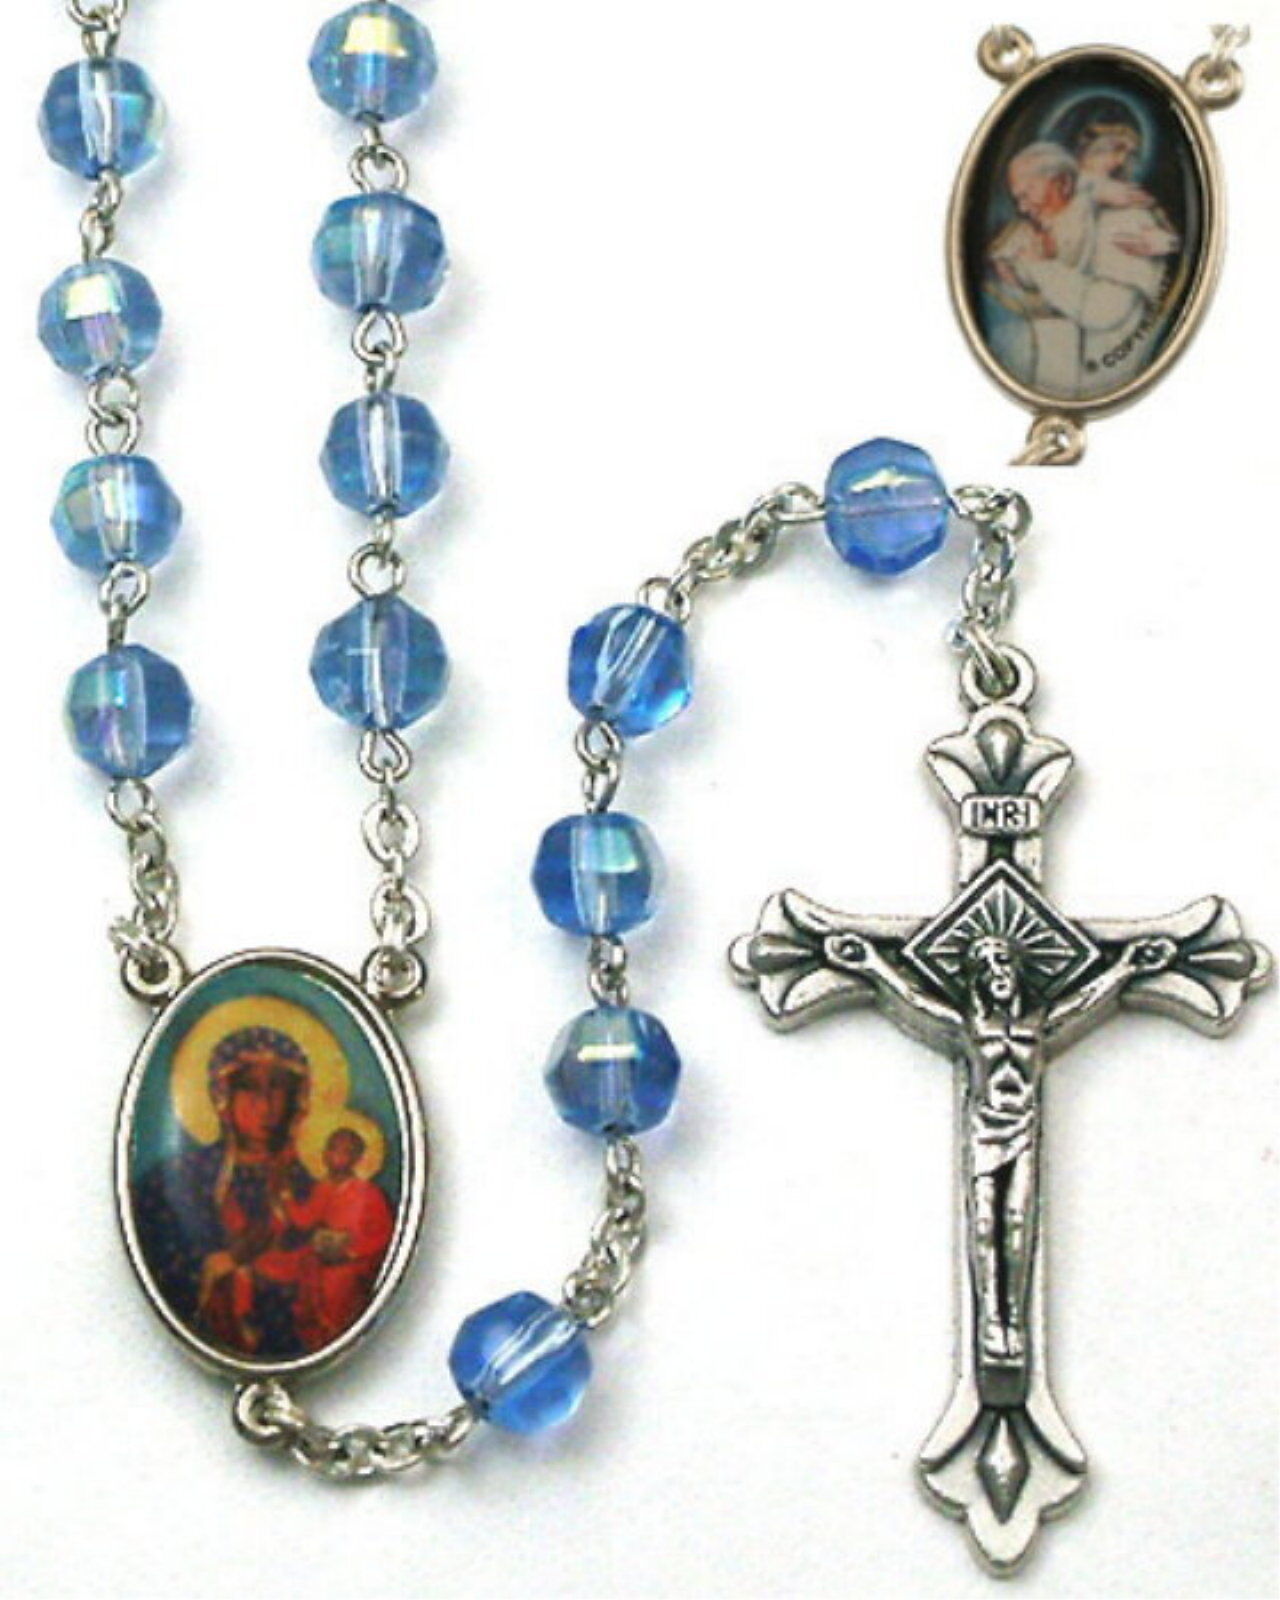 NEW MADE IN ITALY BLACK MADONNA OF CZESTOCHOWA ROSARY BLUE AURORA CRYSTAL 